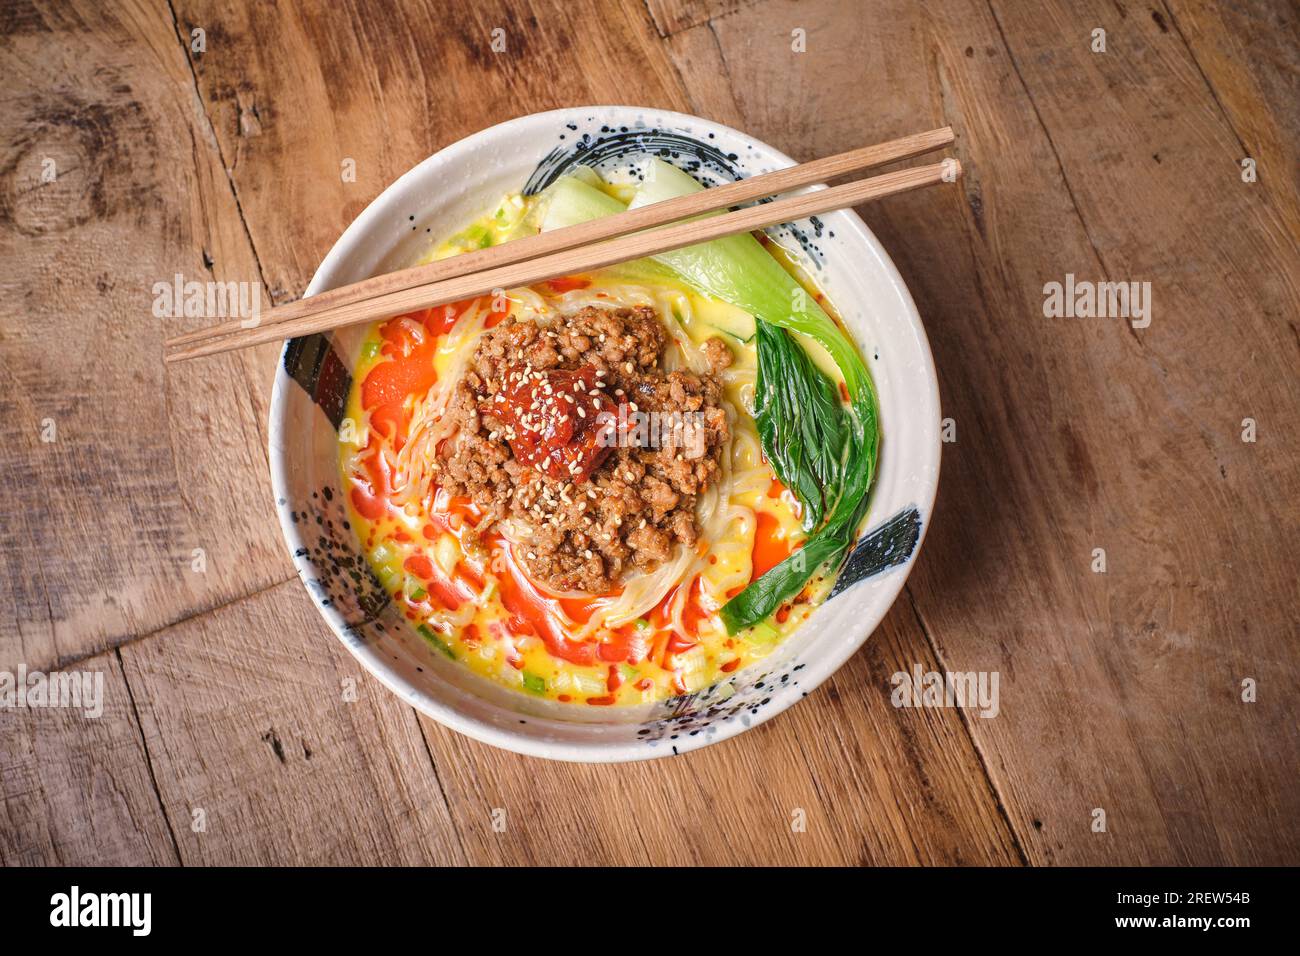 Stock photo of yummy soup of noodles with minced meat ready to eat. Stock Photo